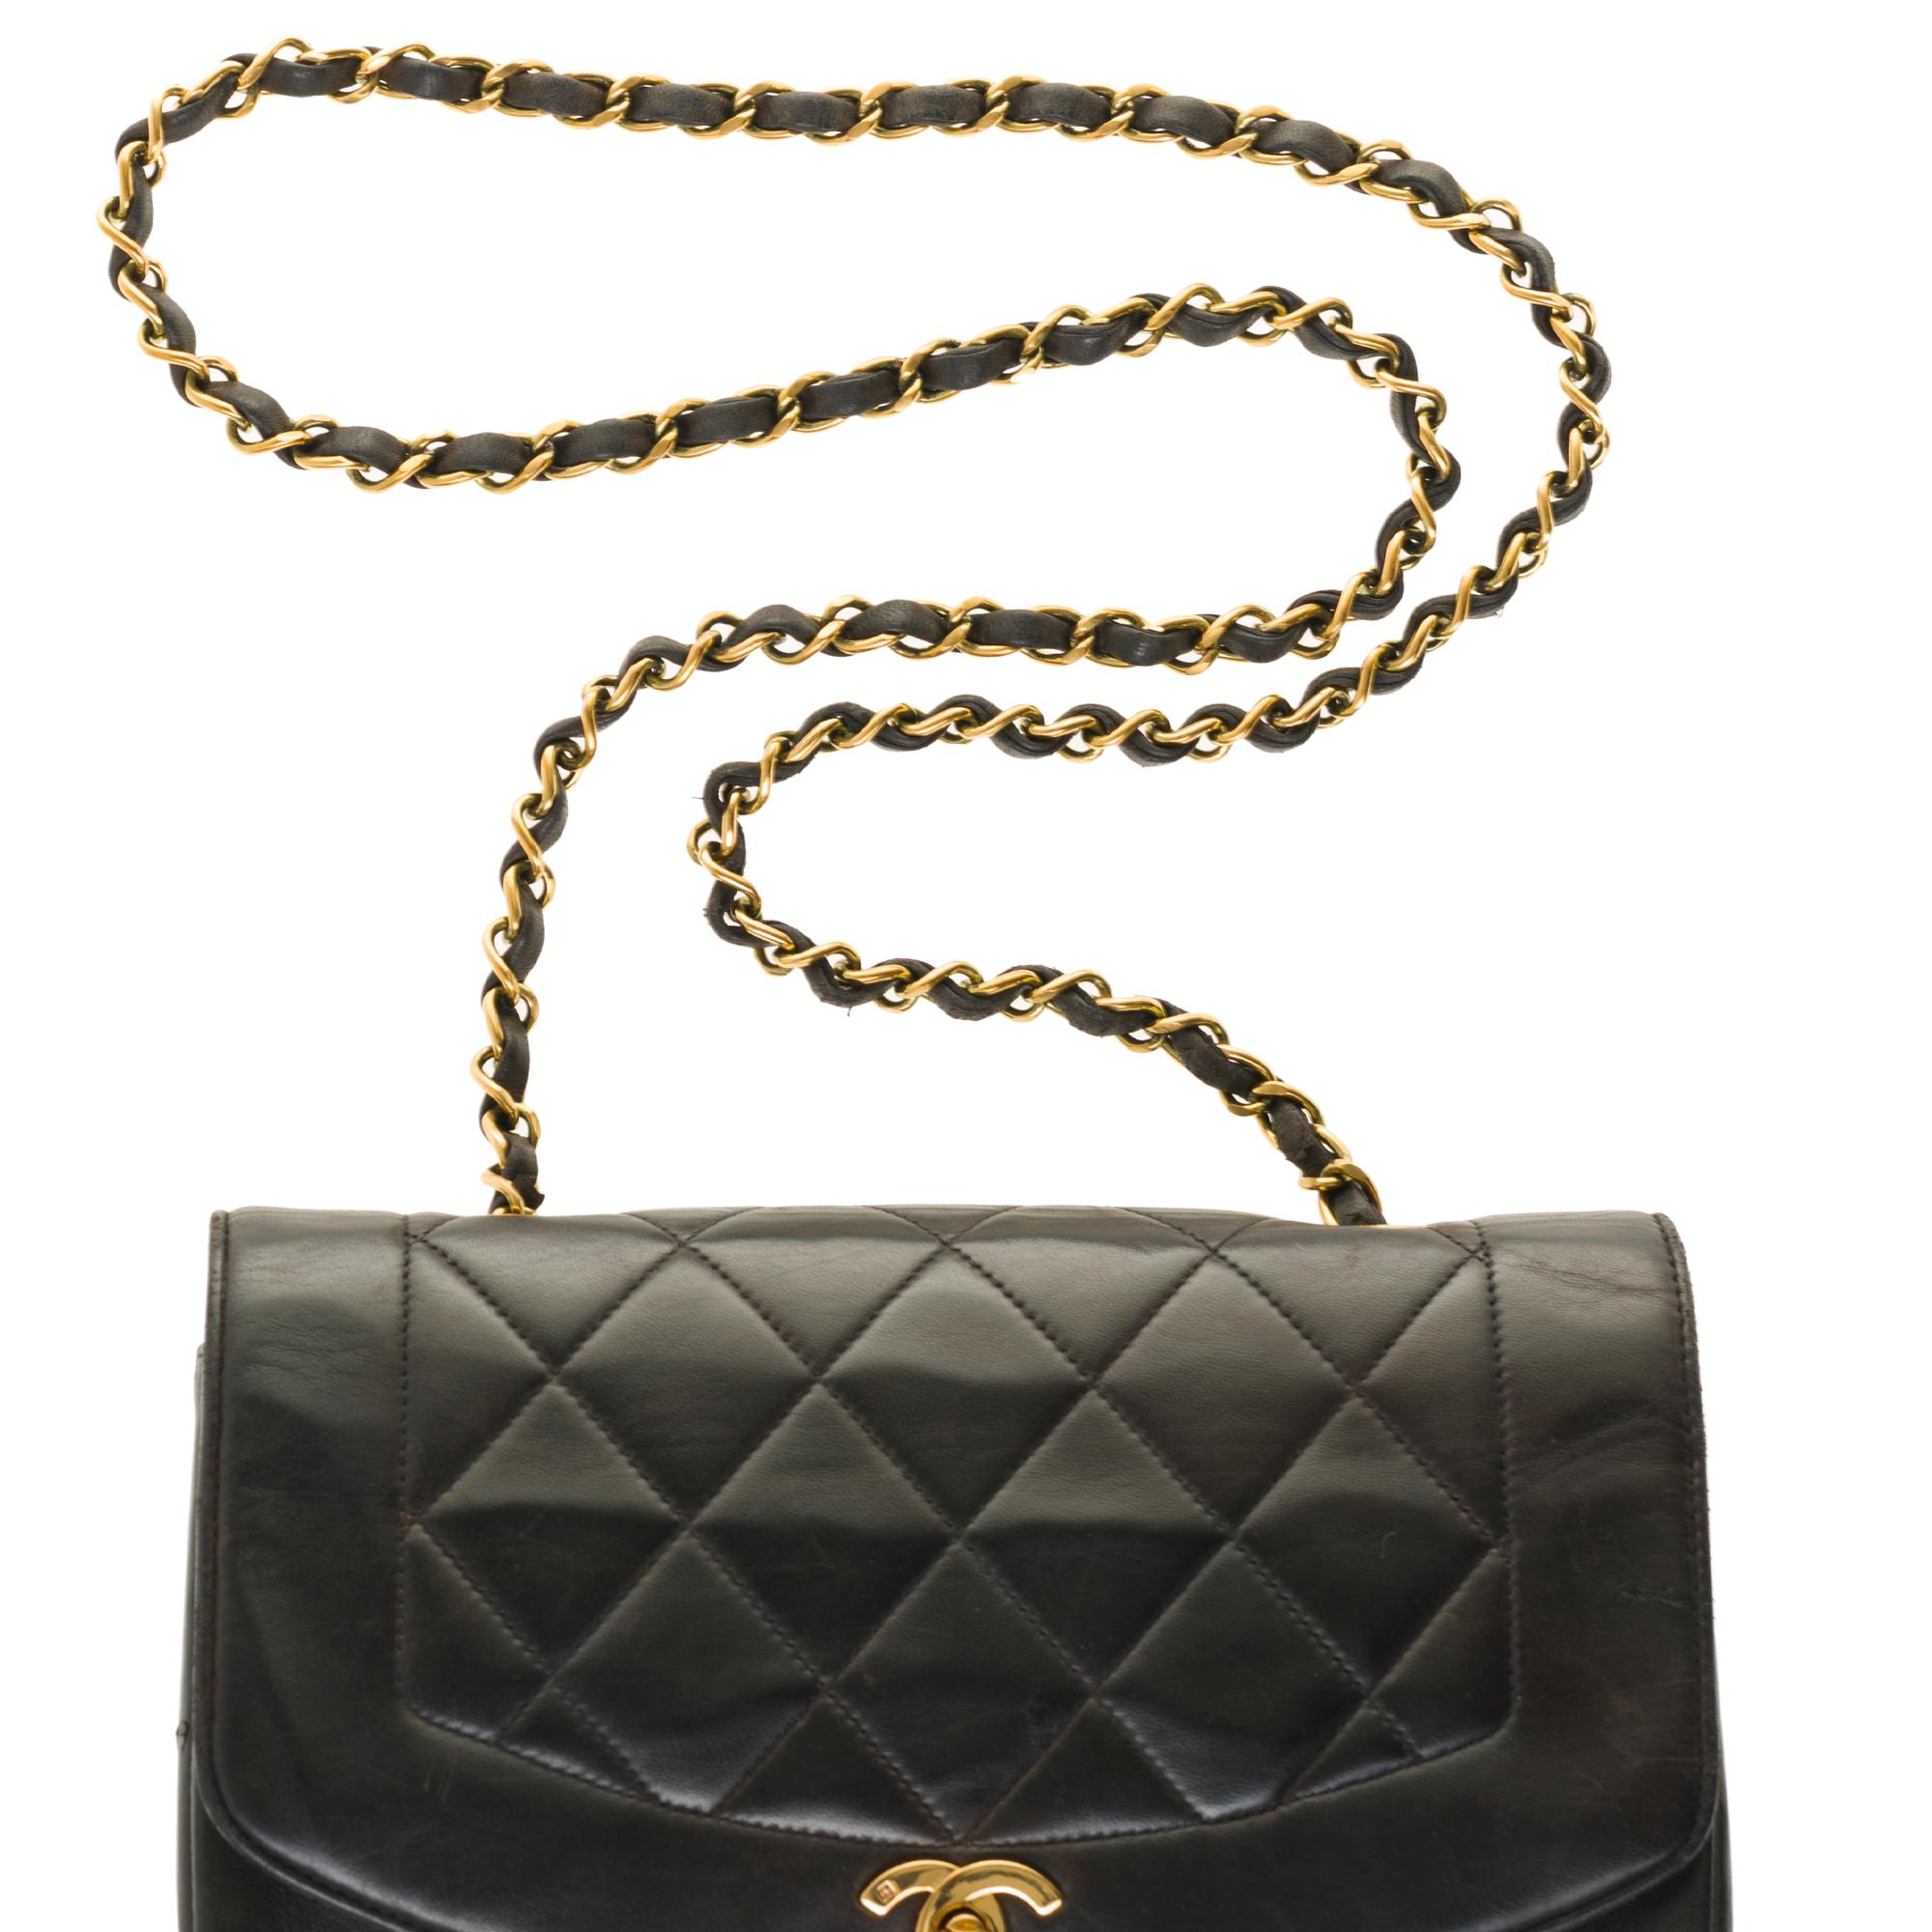 Stunning Chanel Diana Shoulder bag in black quilted lambskin with gold hardware 3